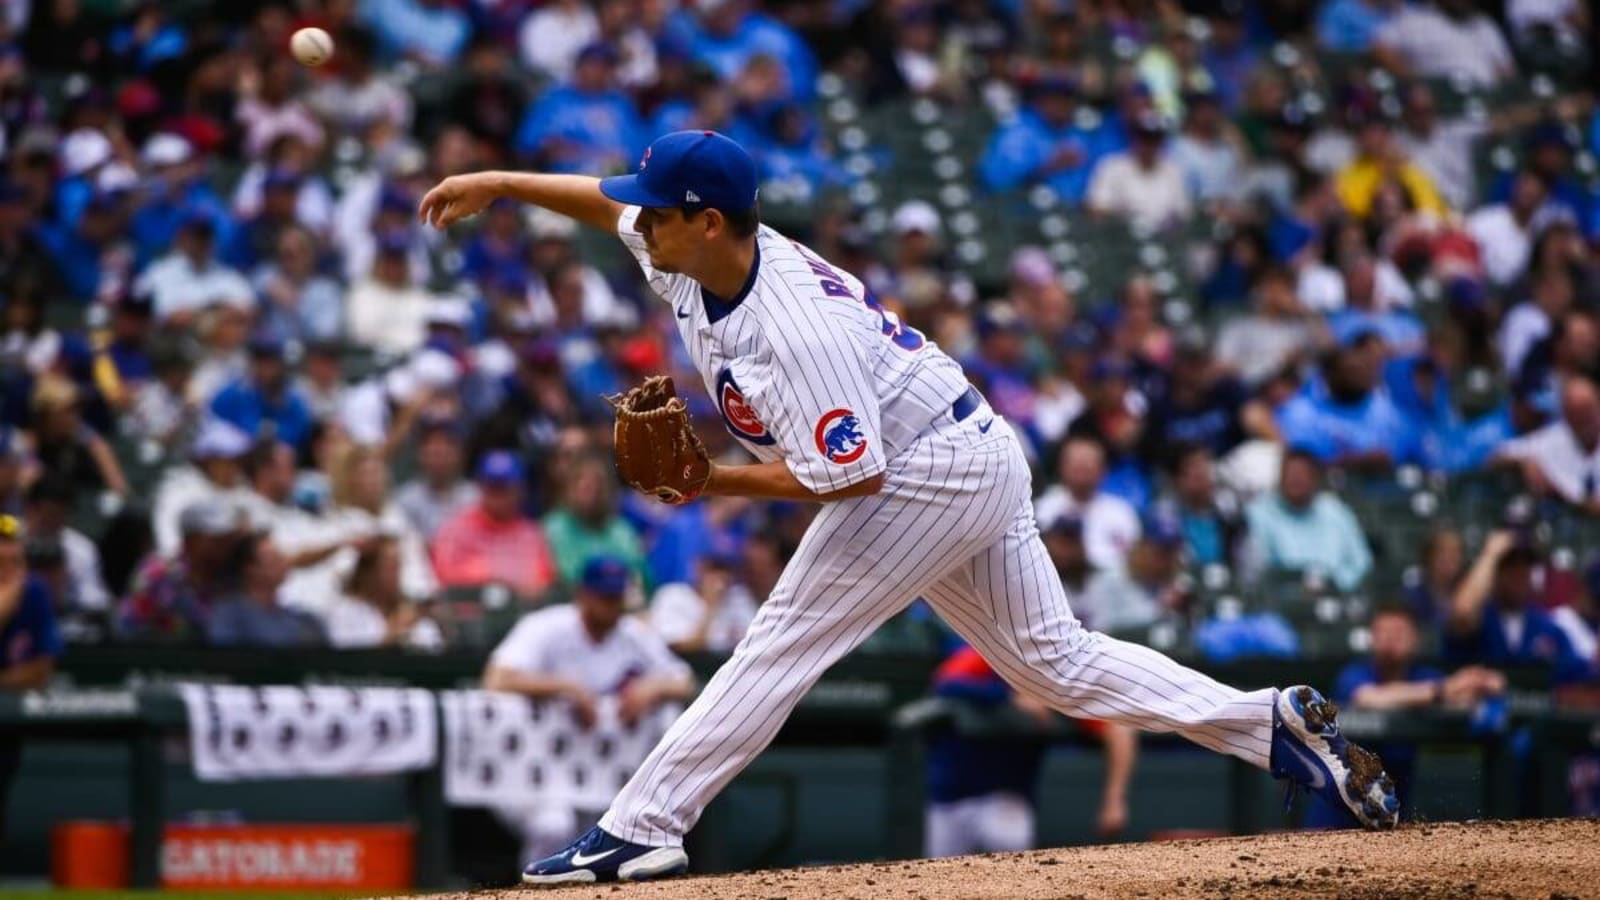 Cubs Pitcher Rucker is Finding Success in August